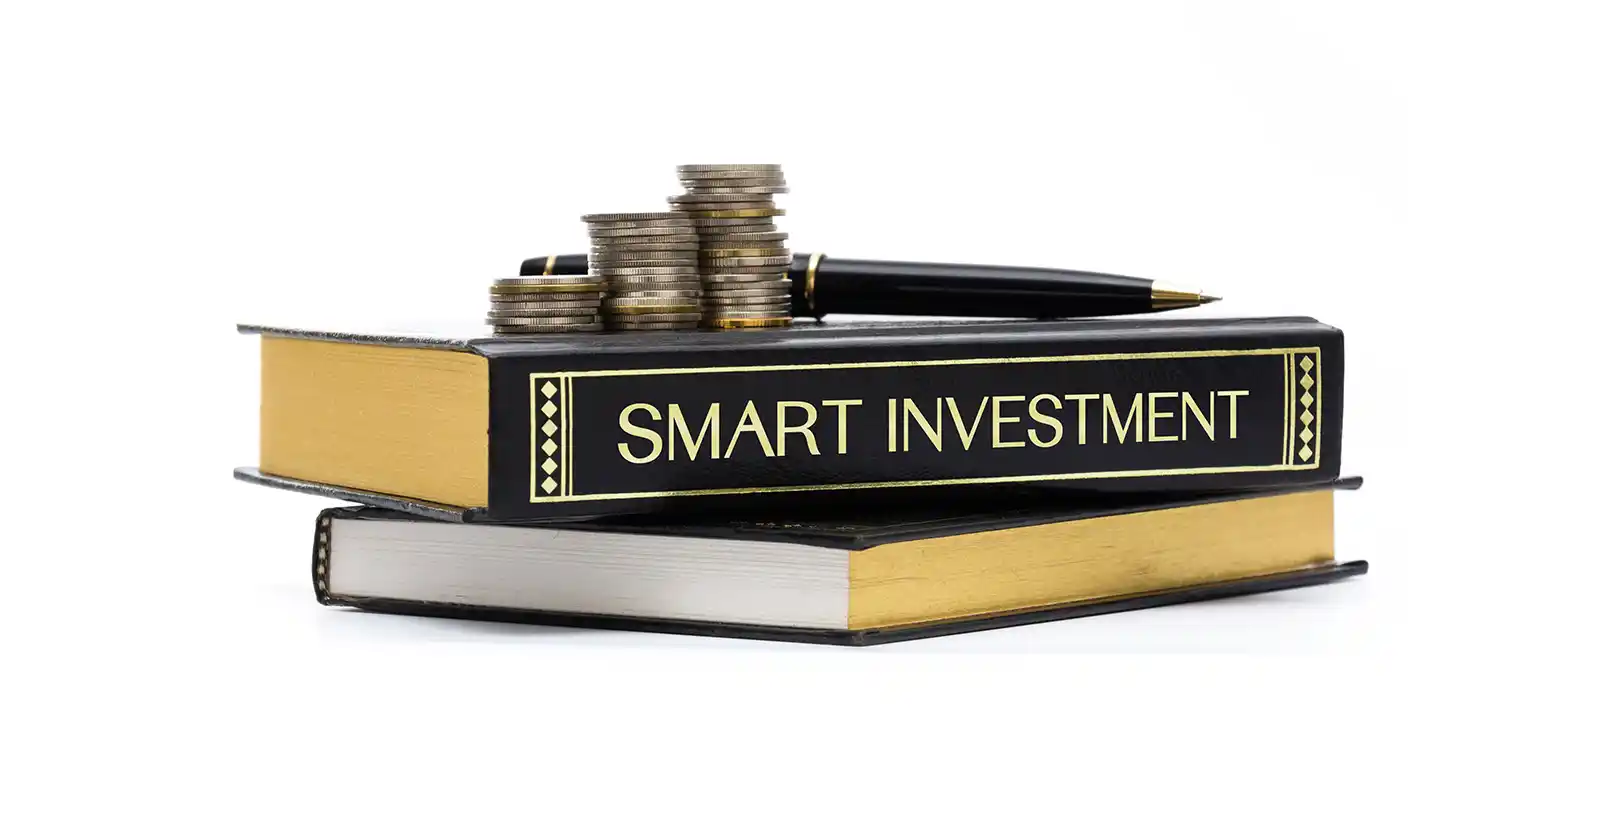 a pen, some coins, and a book named smart investment representing that villas are smart investment options